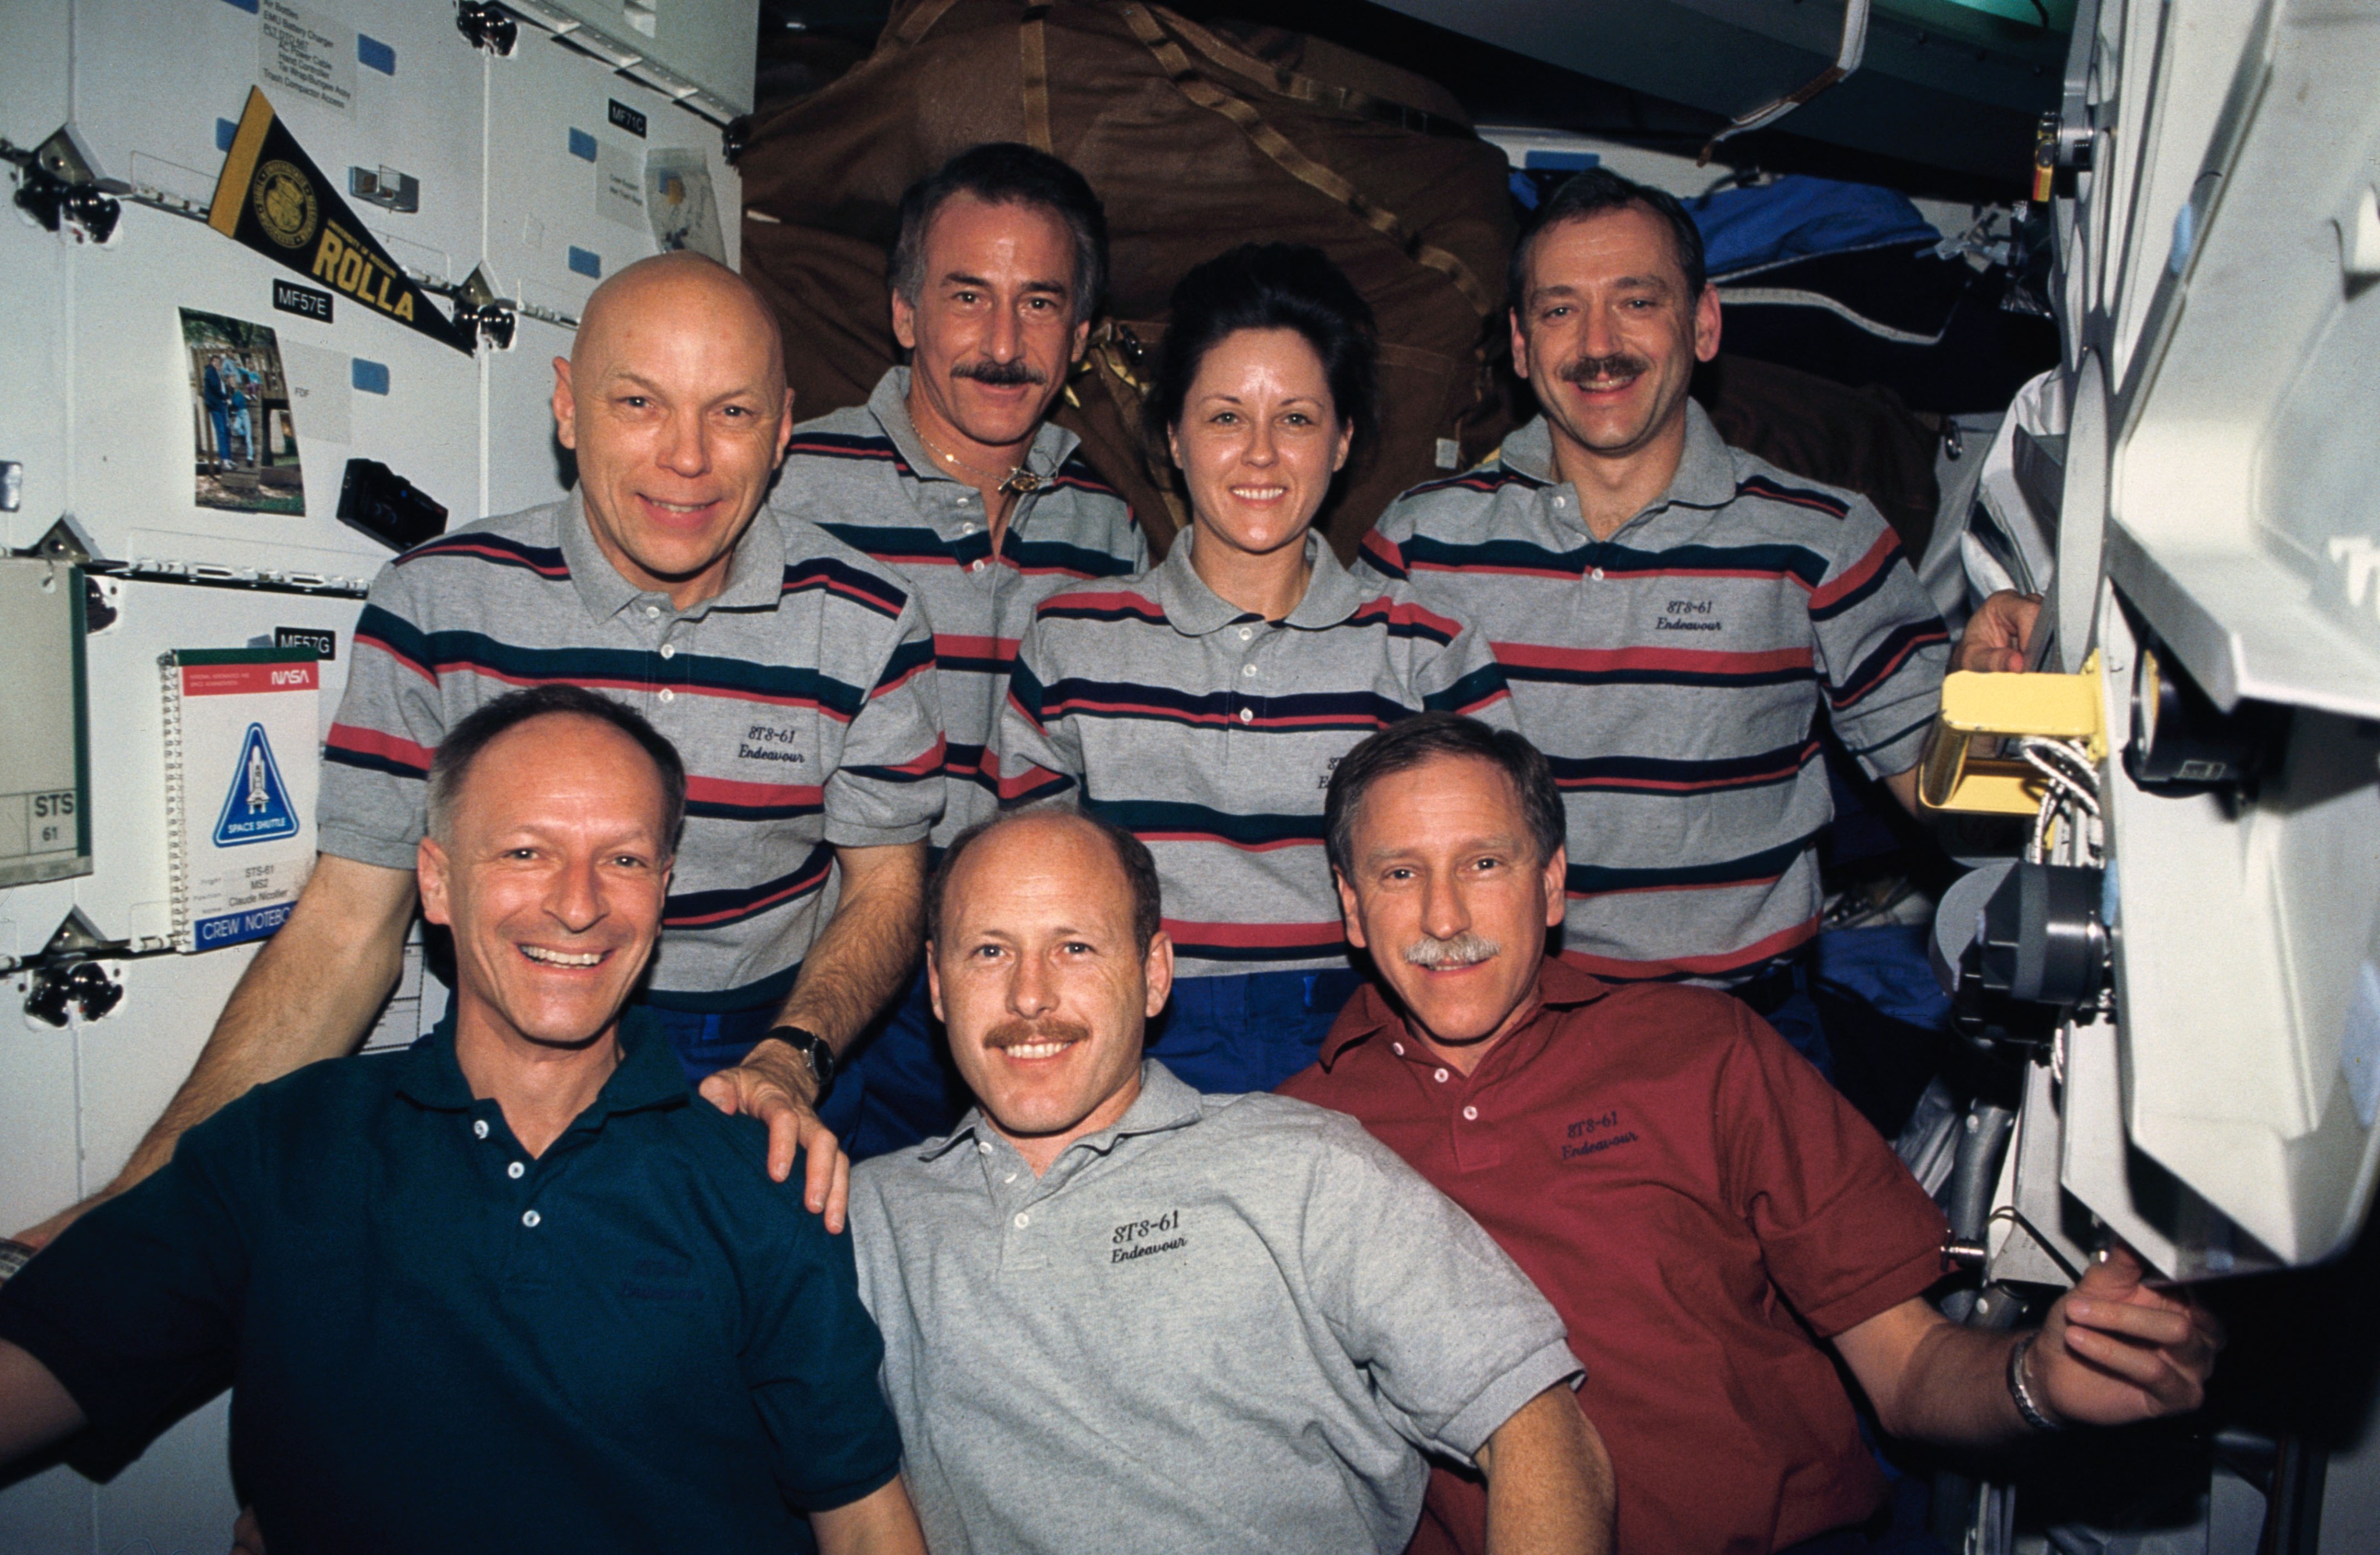 The astronauts of STS-61, the first servicing mission to Hubble, pose for an unofficial portrait while in orbit.